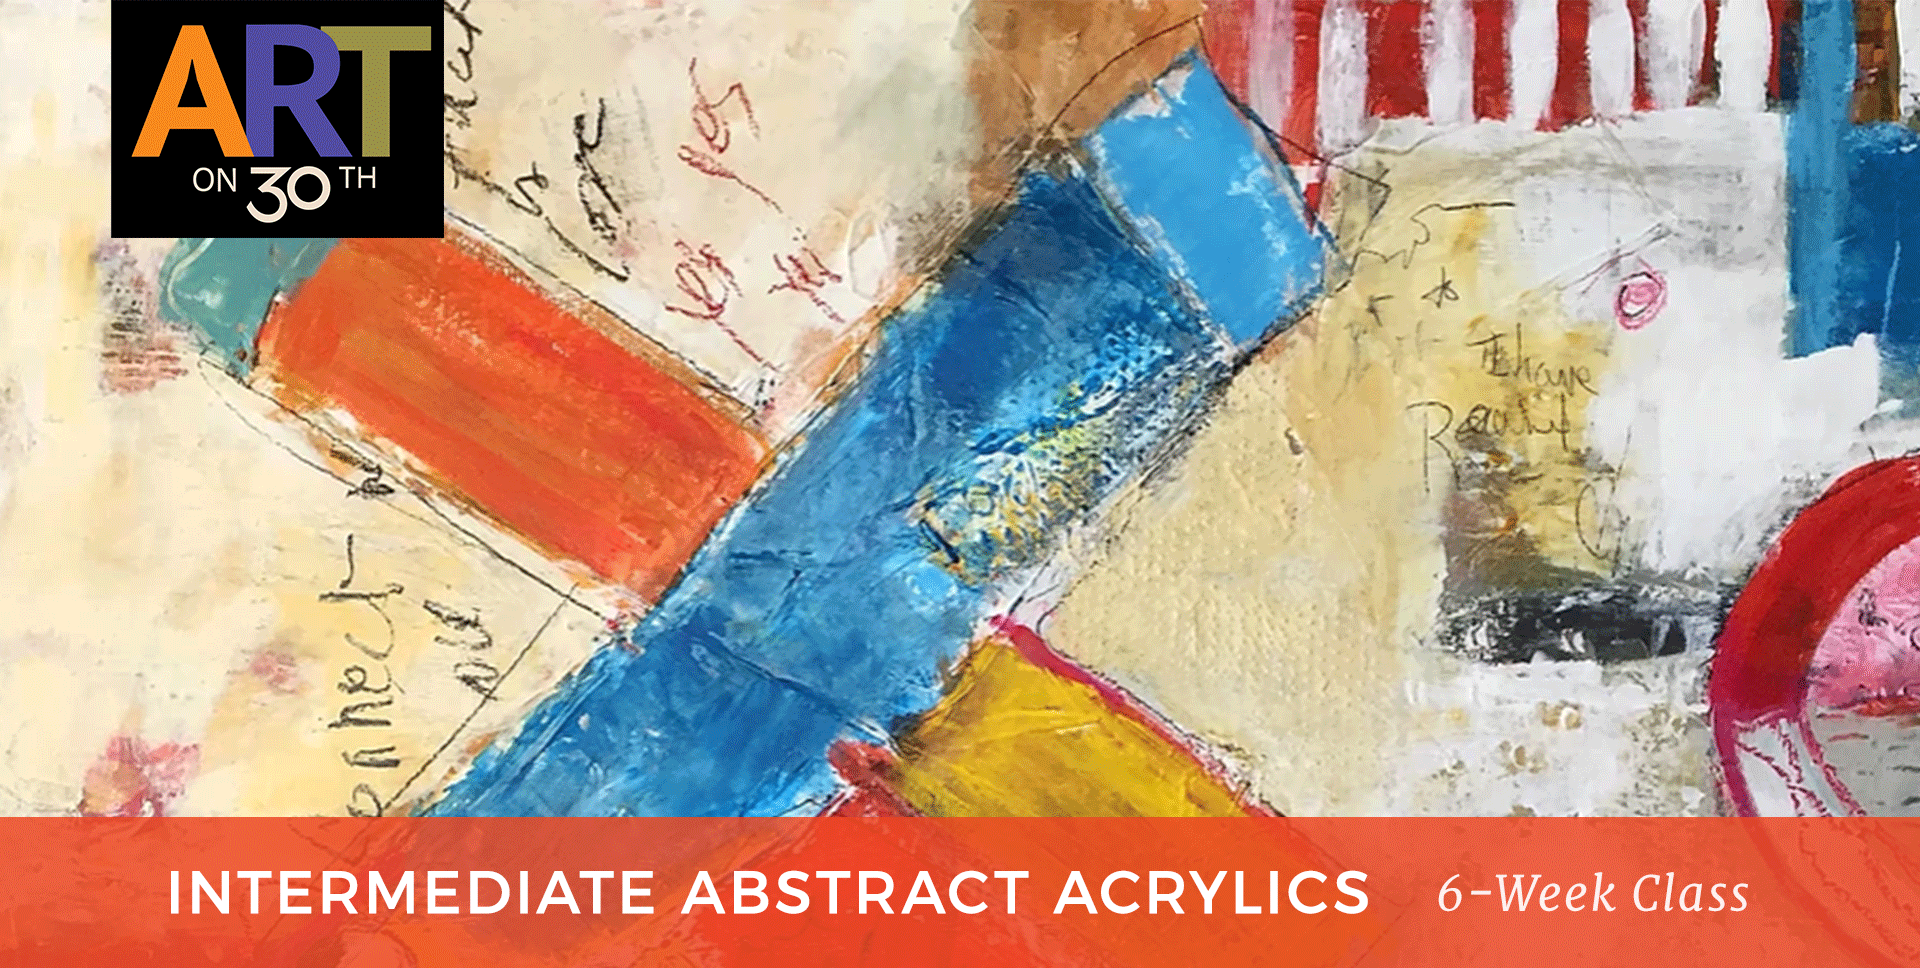 TUE - Intermediate Abstract Acrylic Painting with Kate Ashton